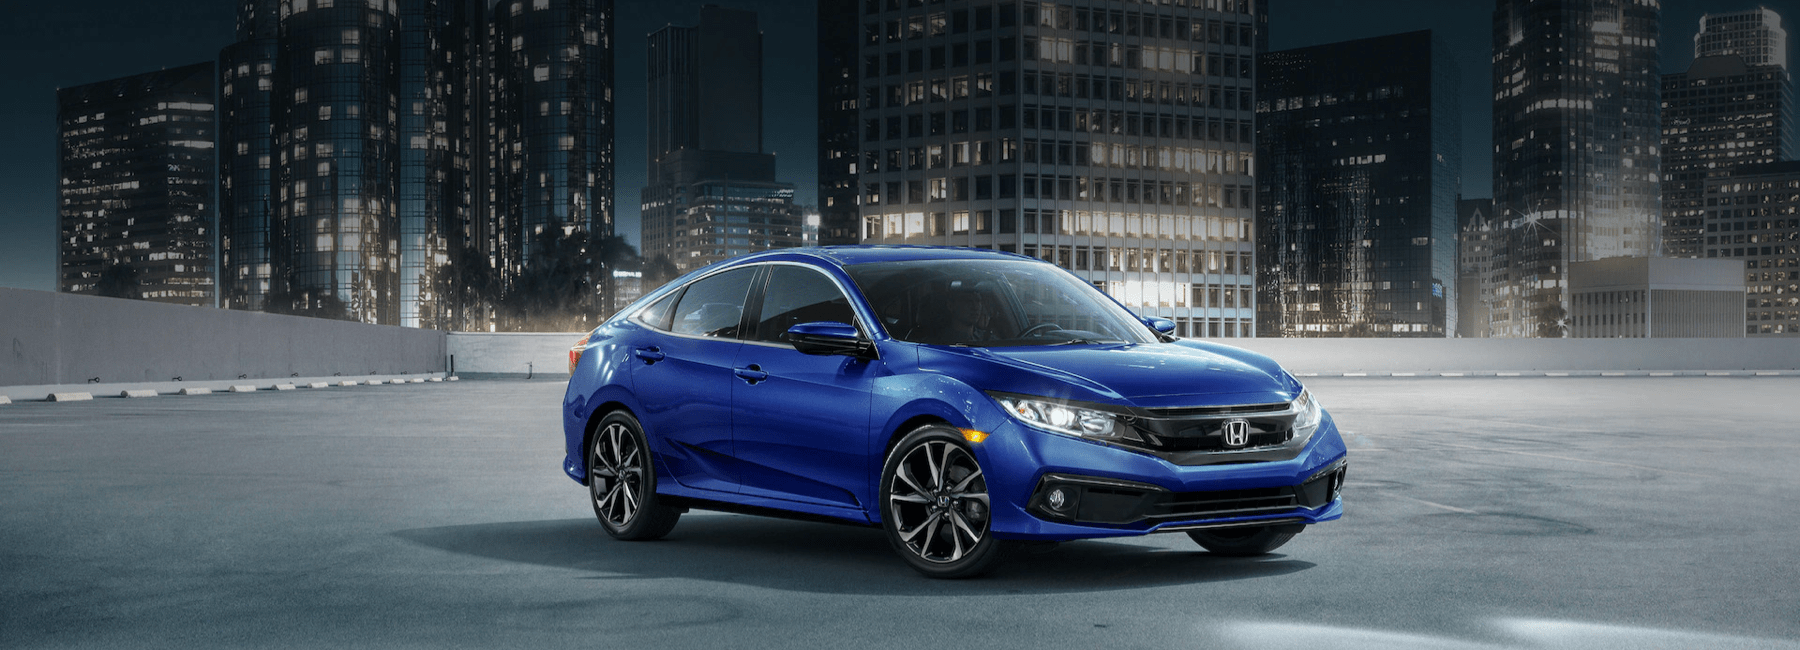 2021-Honda-Civic-Sedan-in-an-empty-parking-lot-in-front-of-an-urban-cityscape-at-night